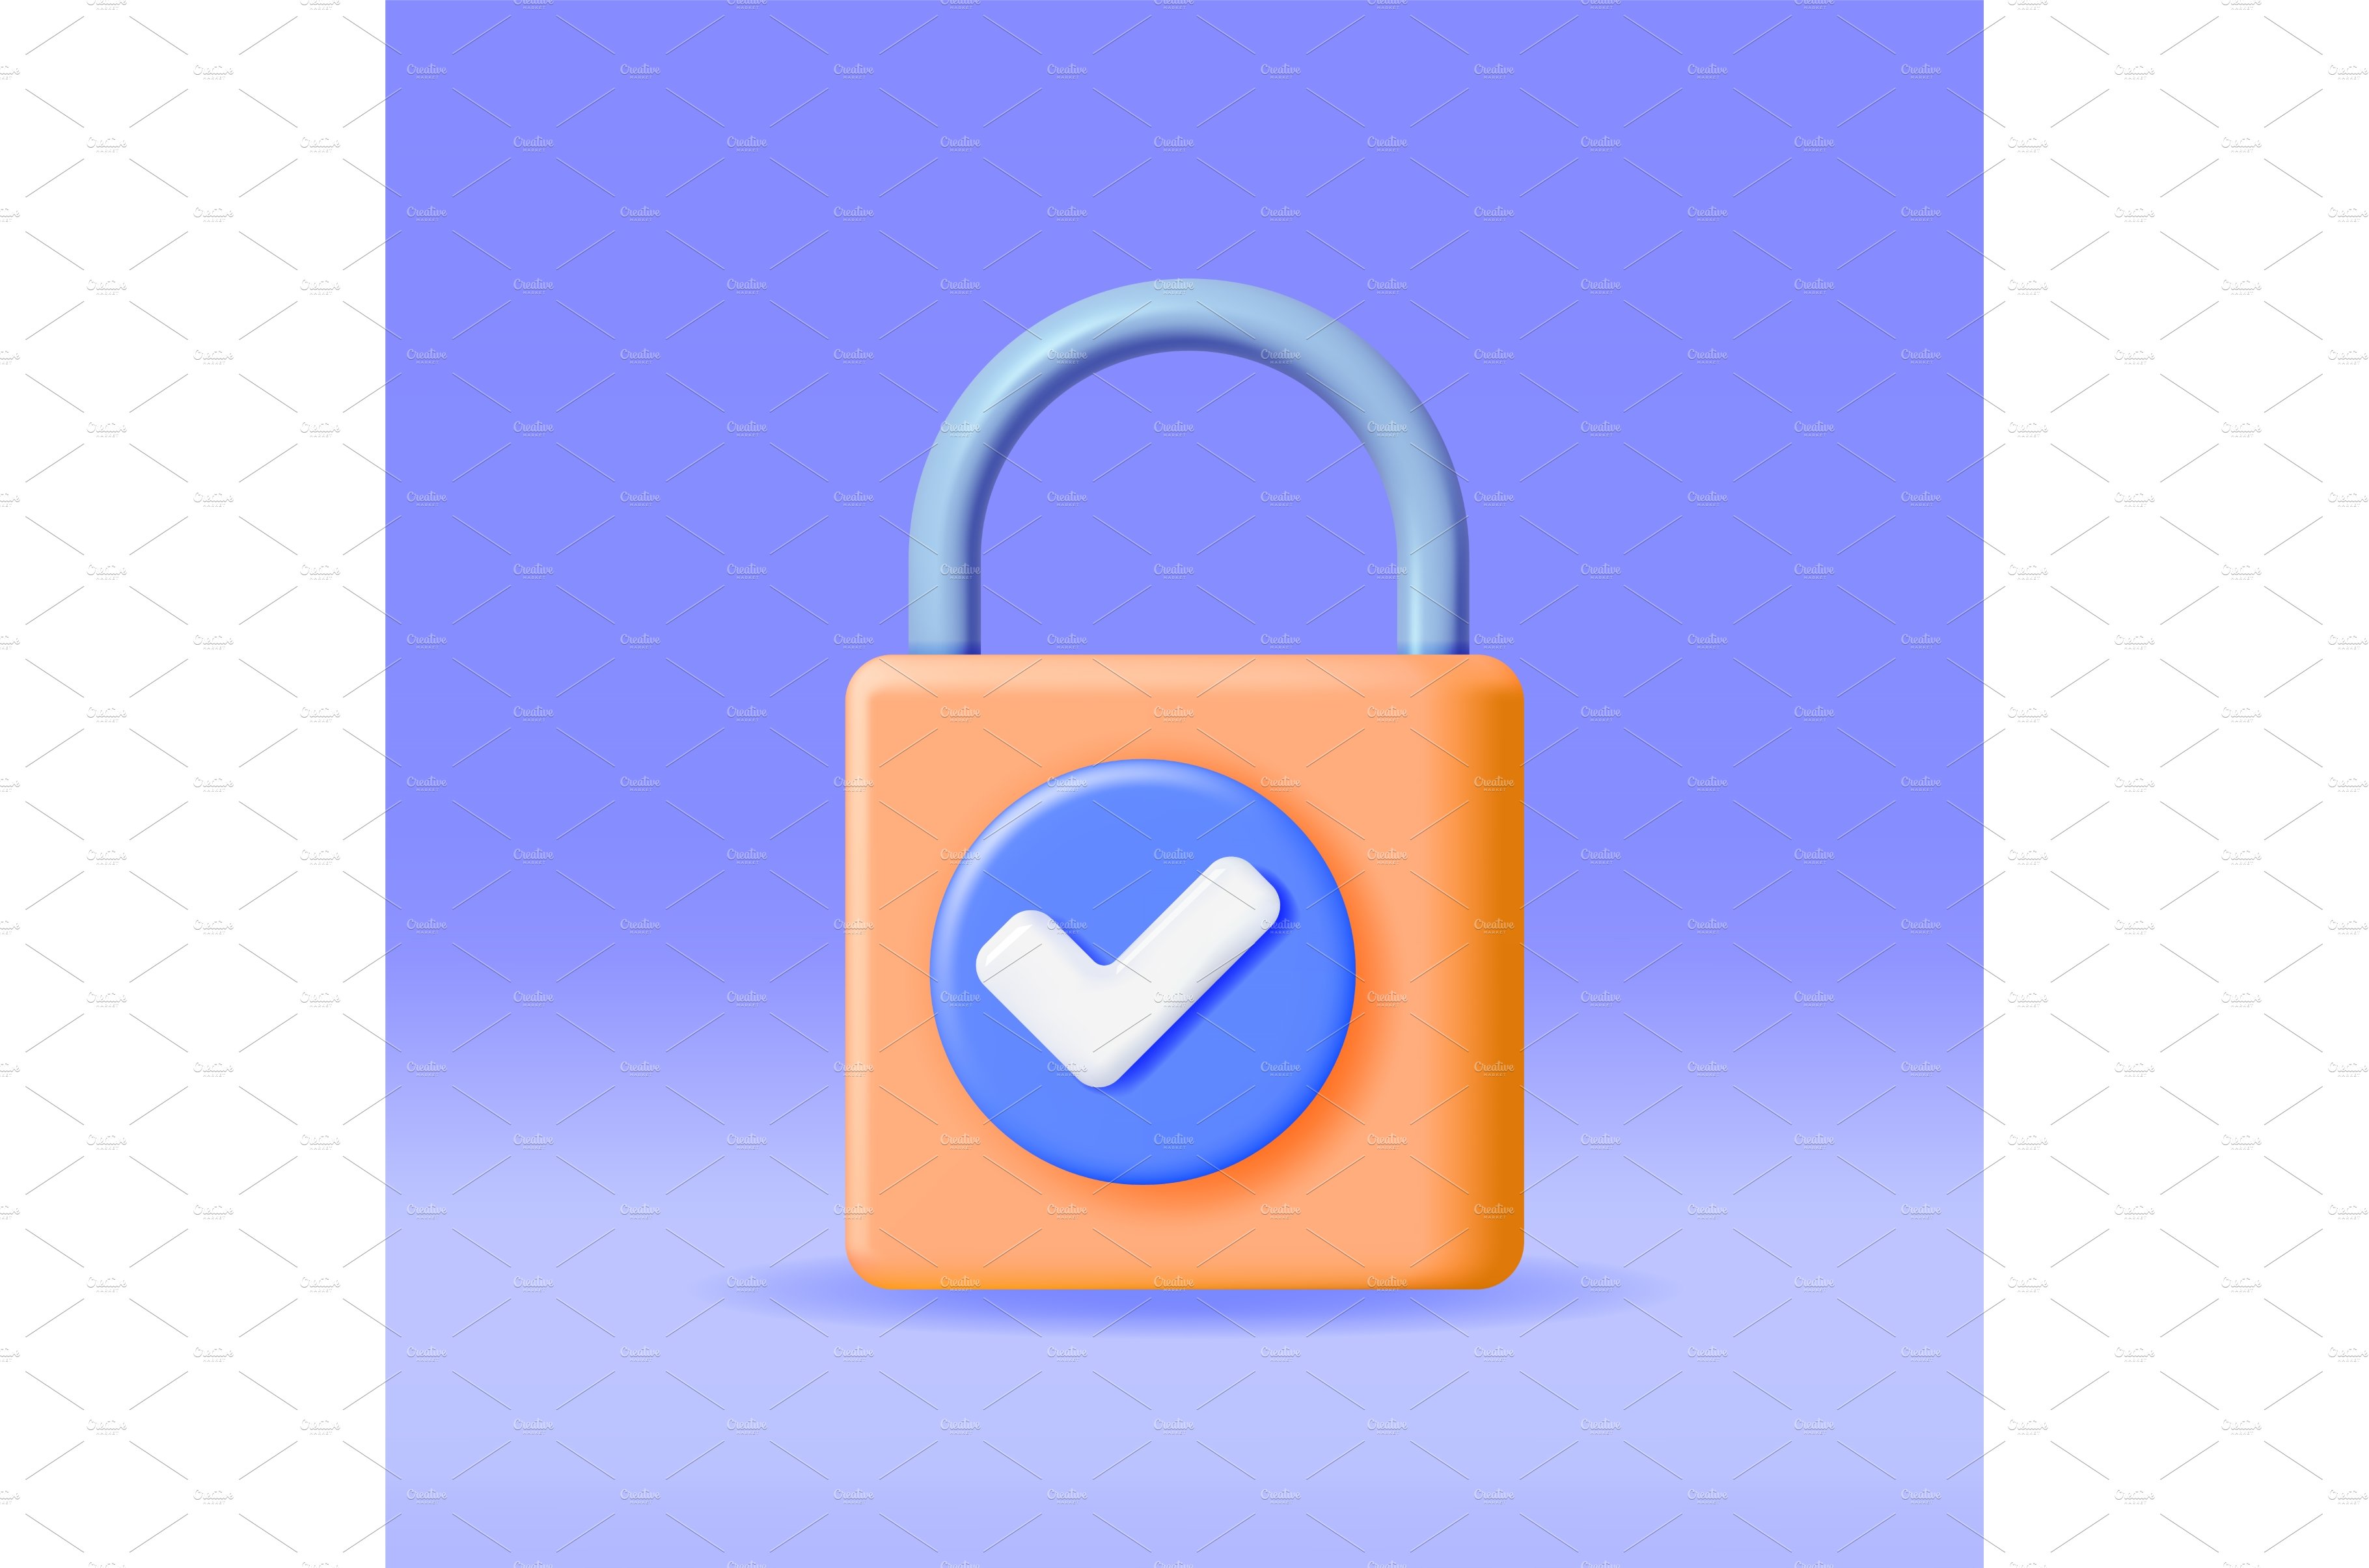 3D Padlock with Approved Checkmark cover image.